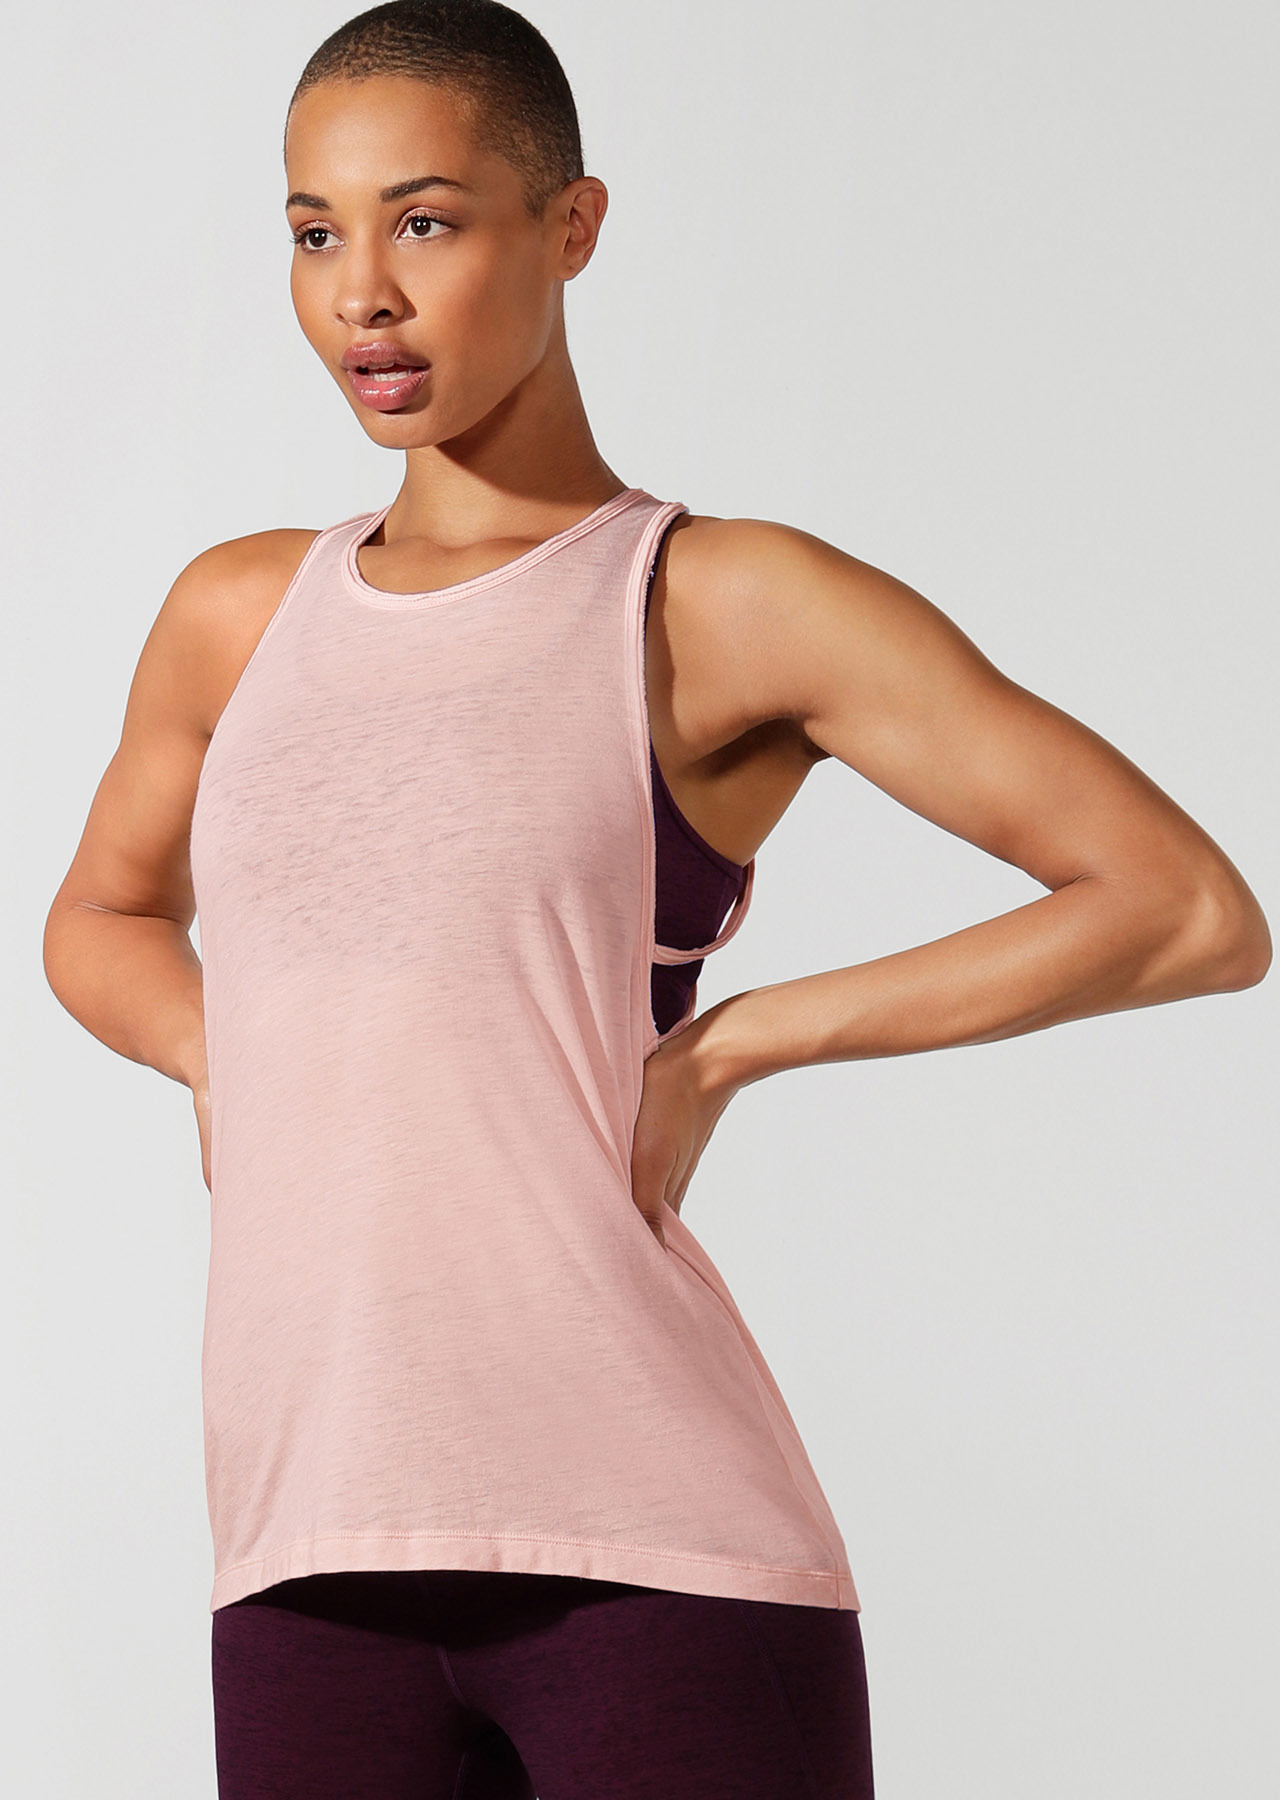 Move With Ease Tank, Dark Dusty Pink, Dark Dusty Pink